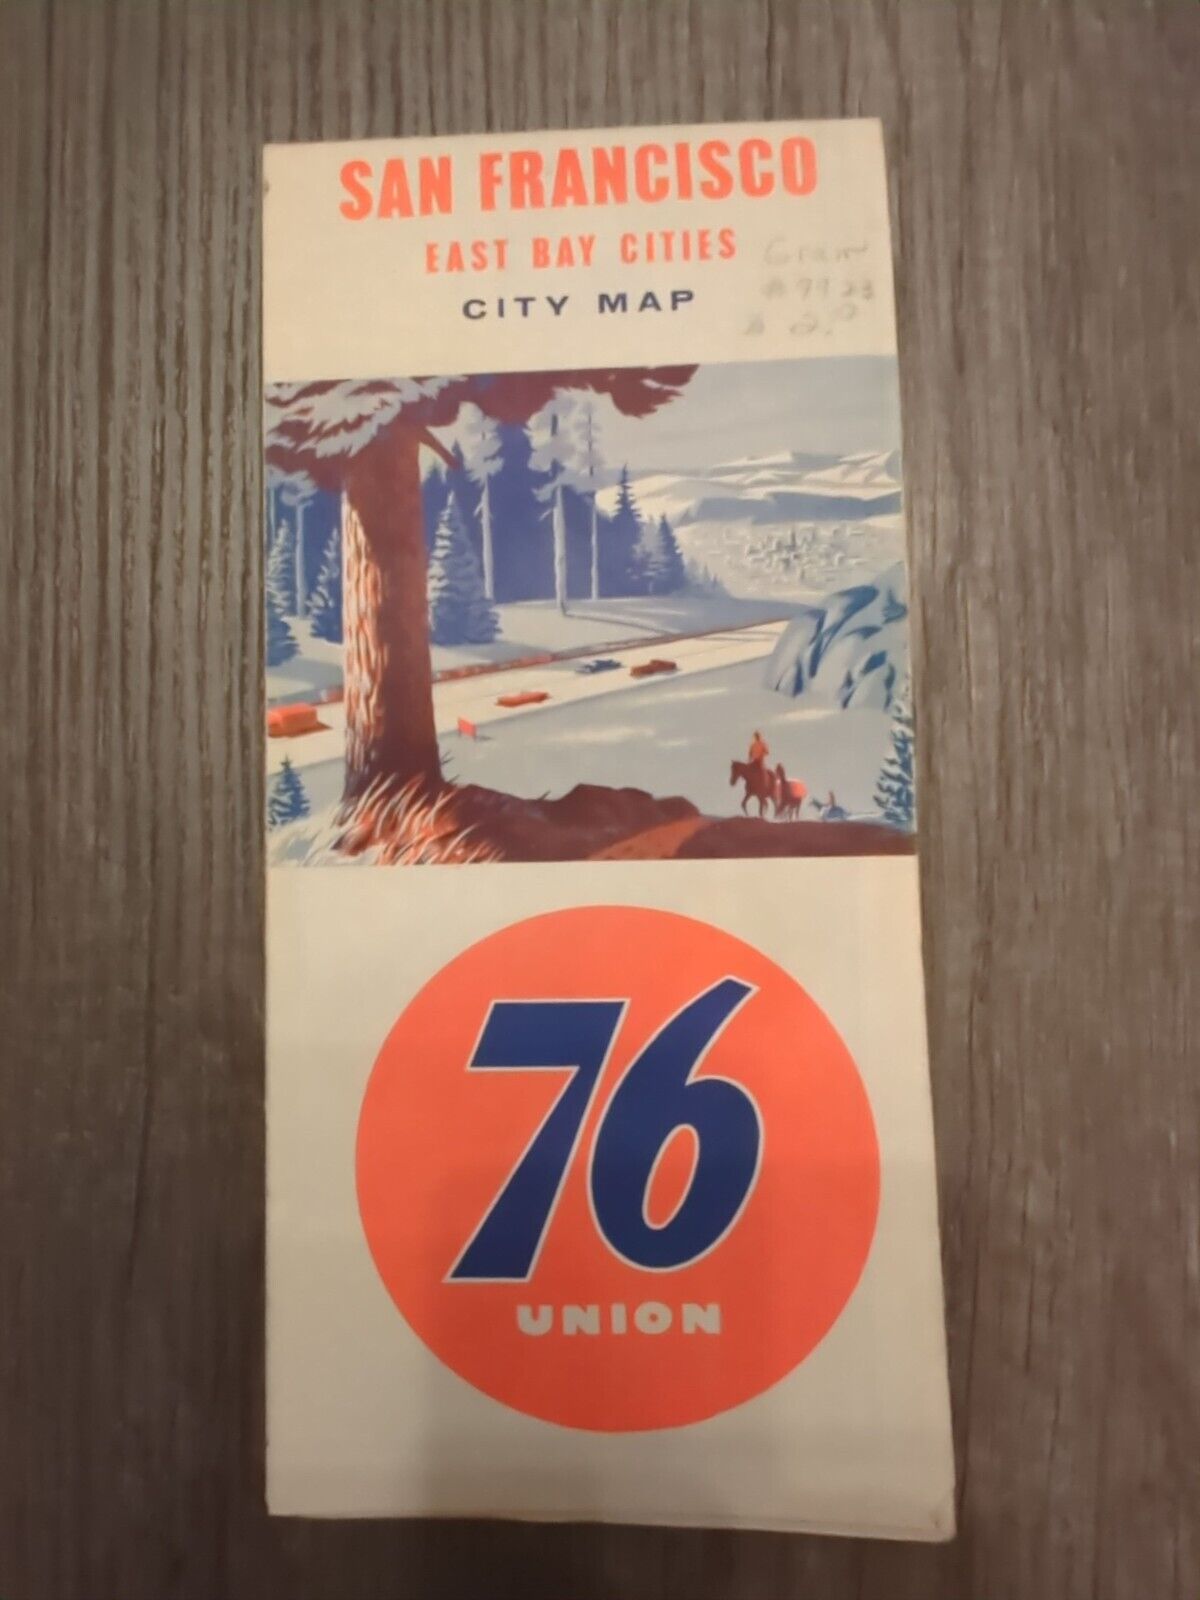 San Francisco & East Bay Cities Road Map Courtesy of Union 76 1960's